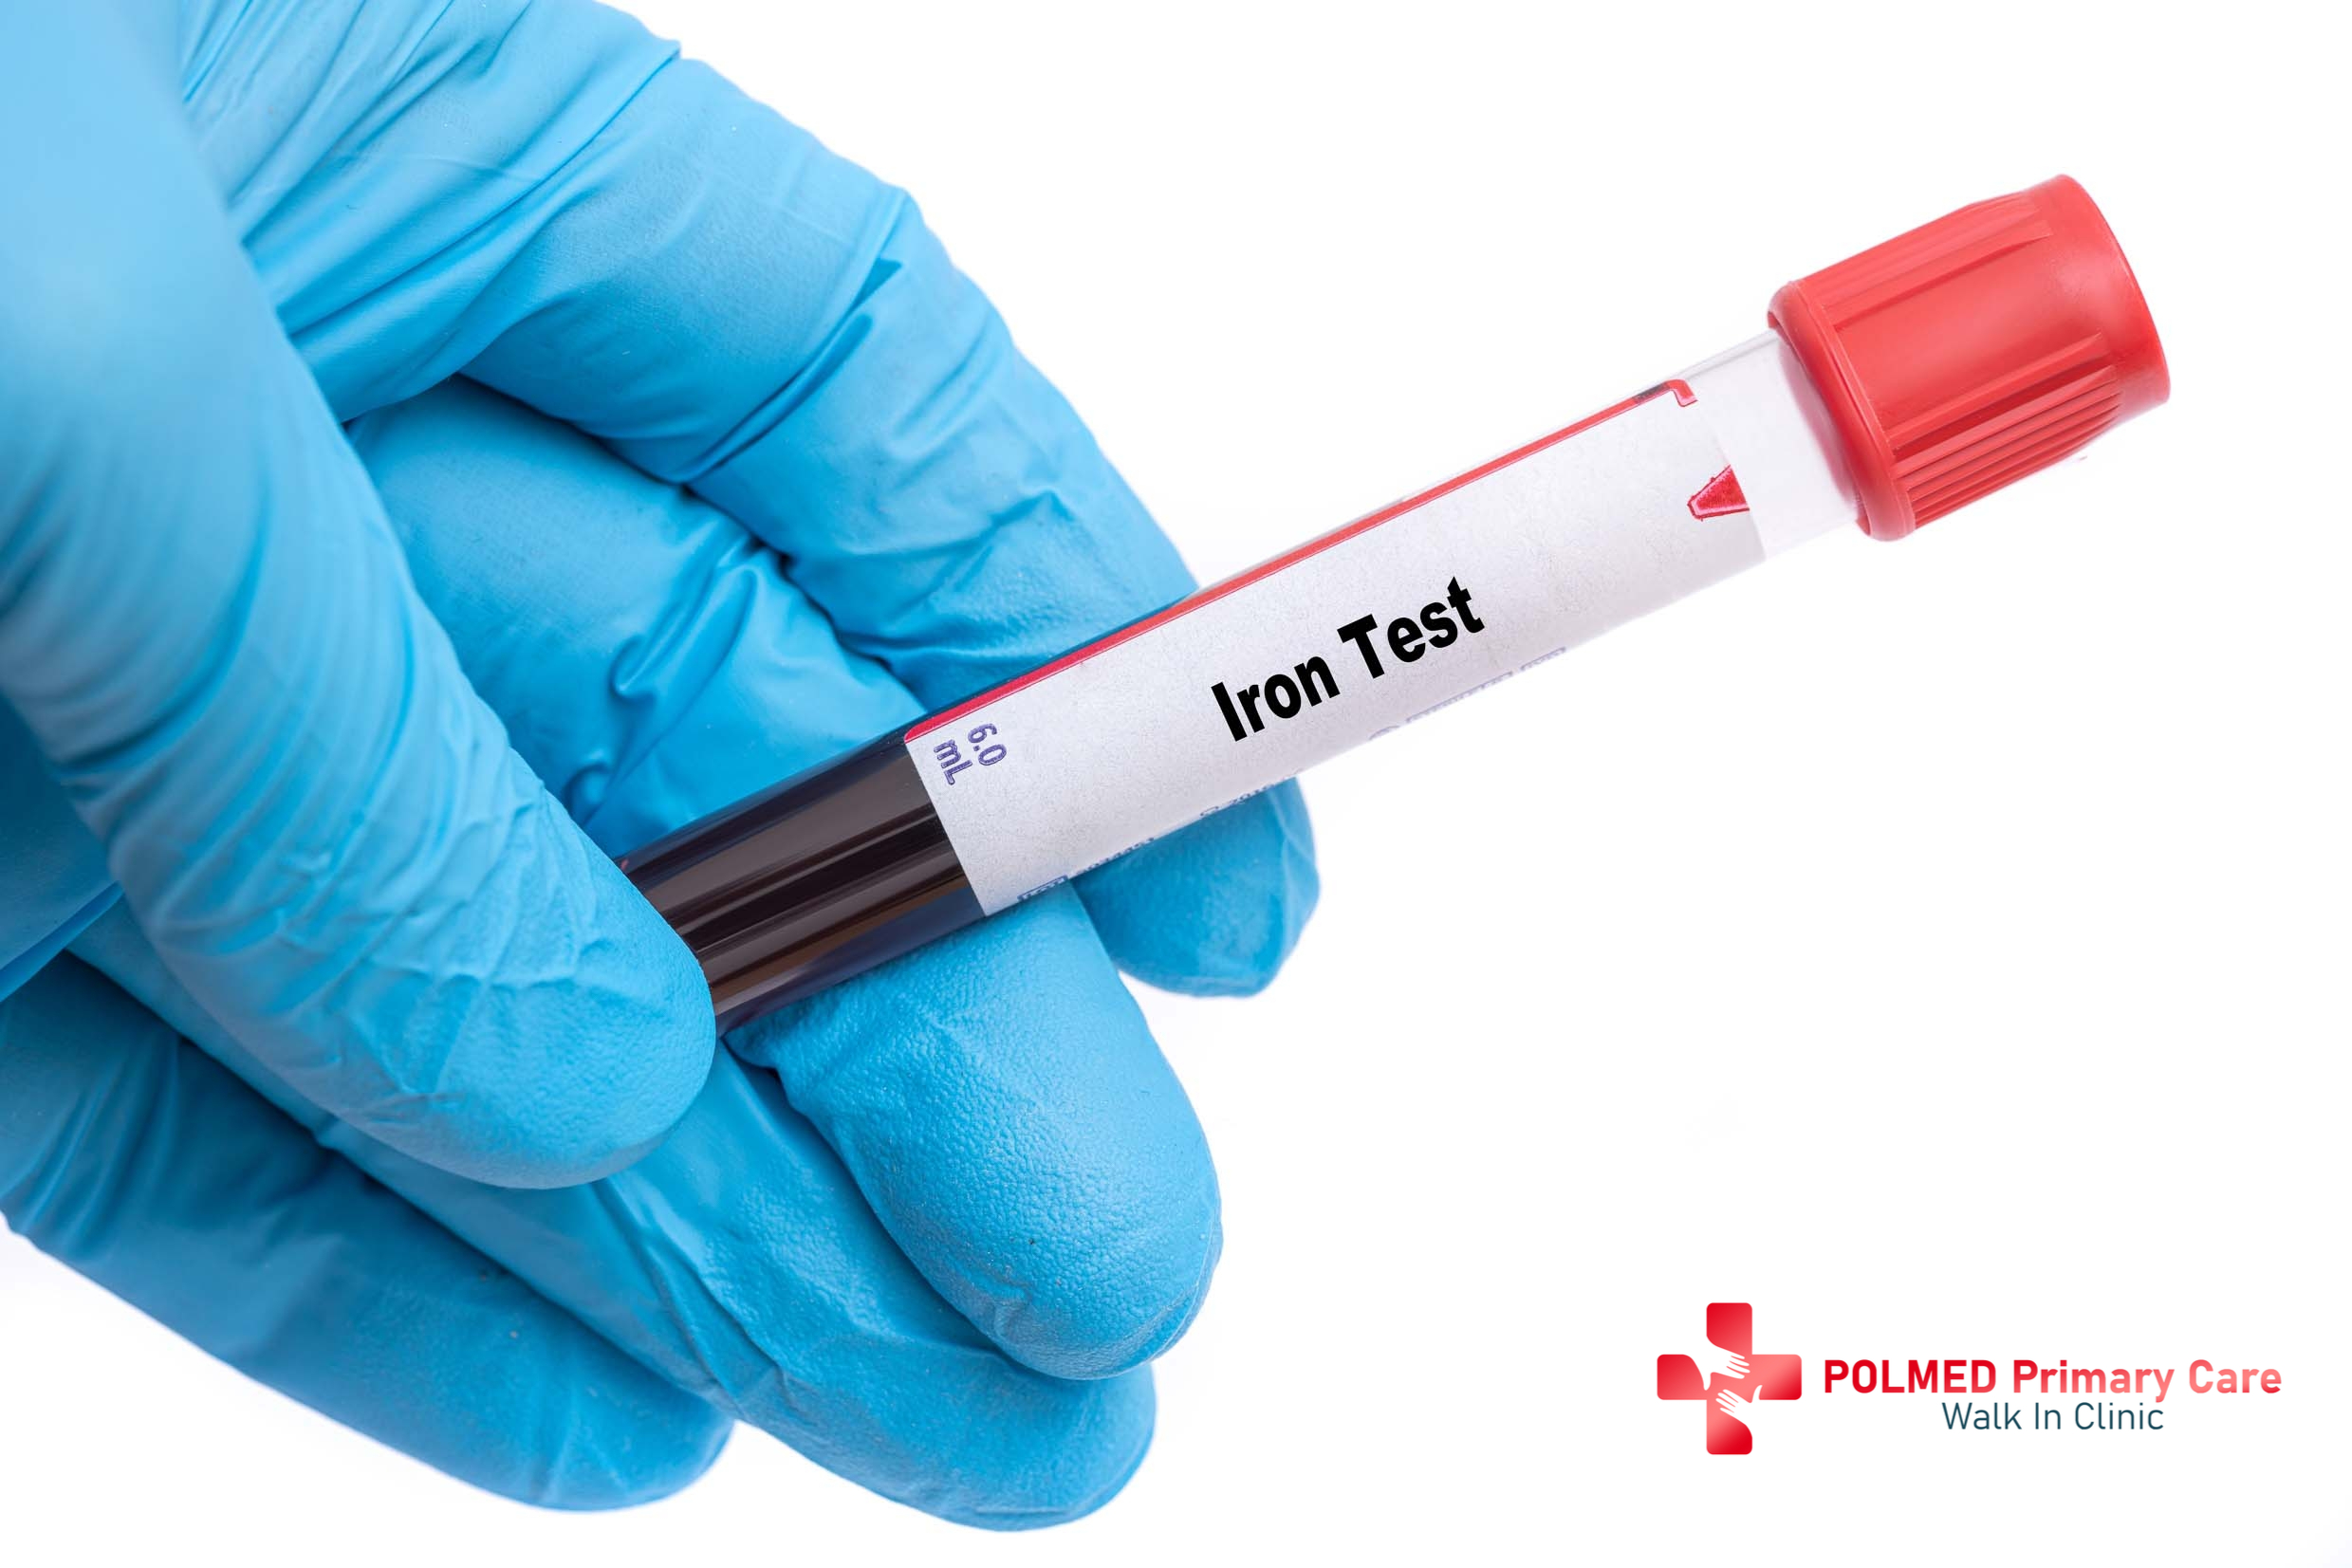 Polmed Primary Care & Walk-In Clinic Explains Why You May Need Iron Testing and Injections